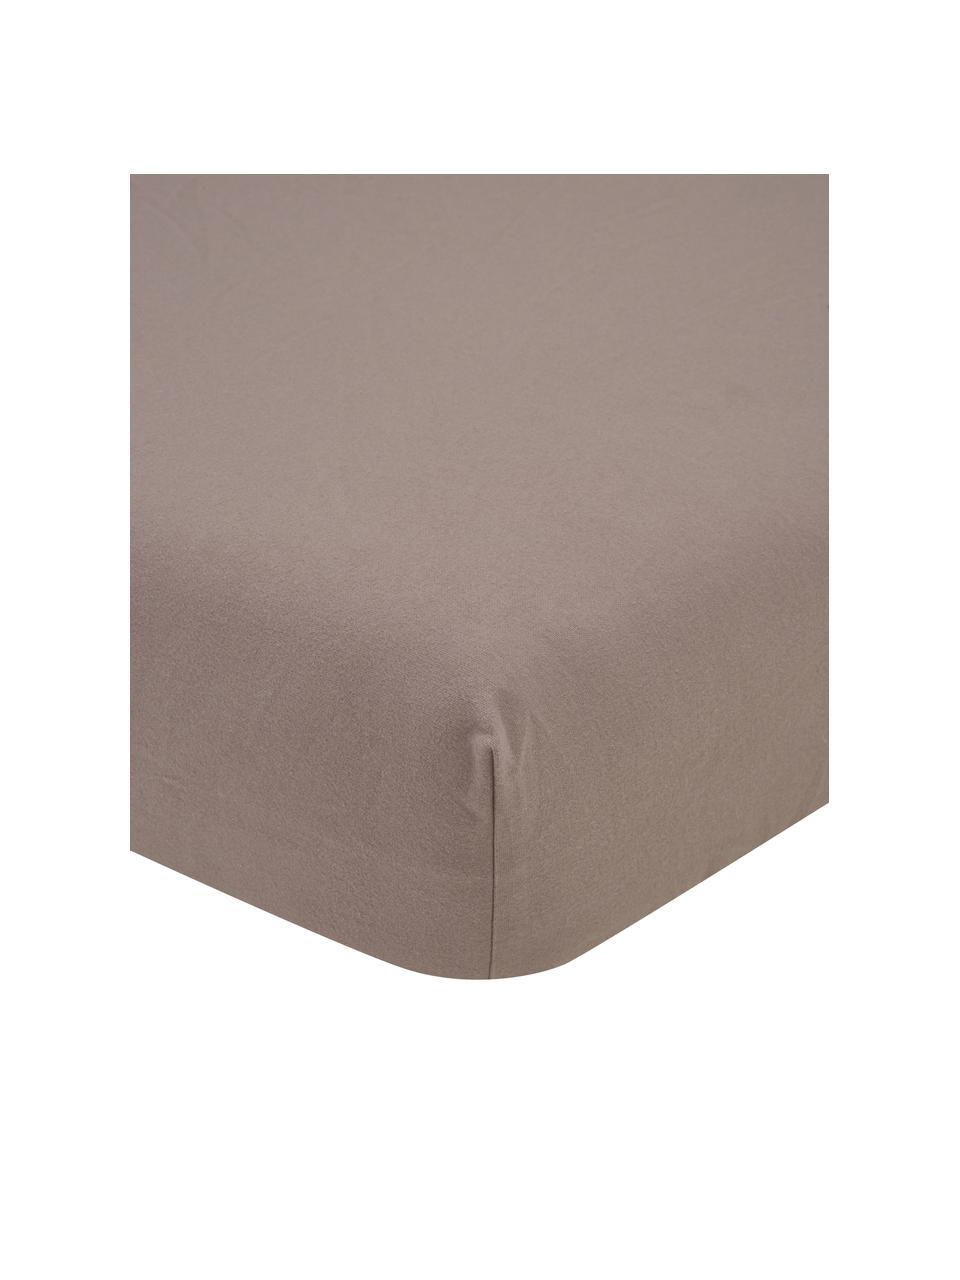 Drap-housse flanelle taupe Erica, Beige